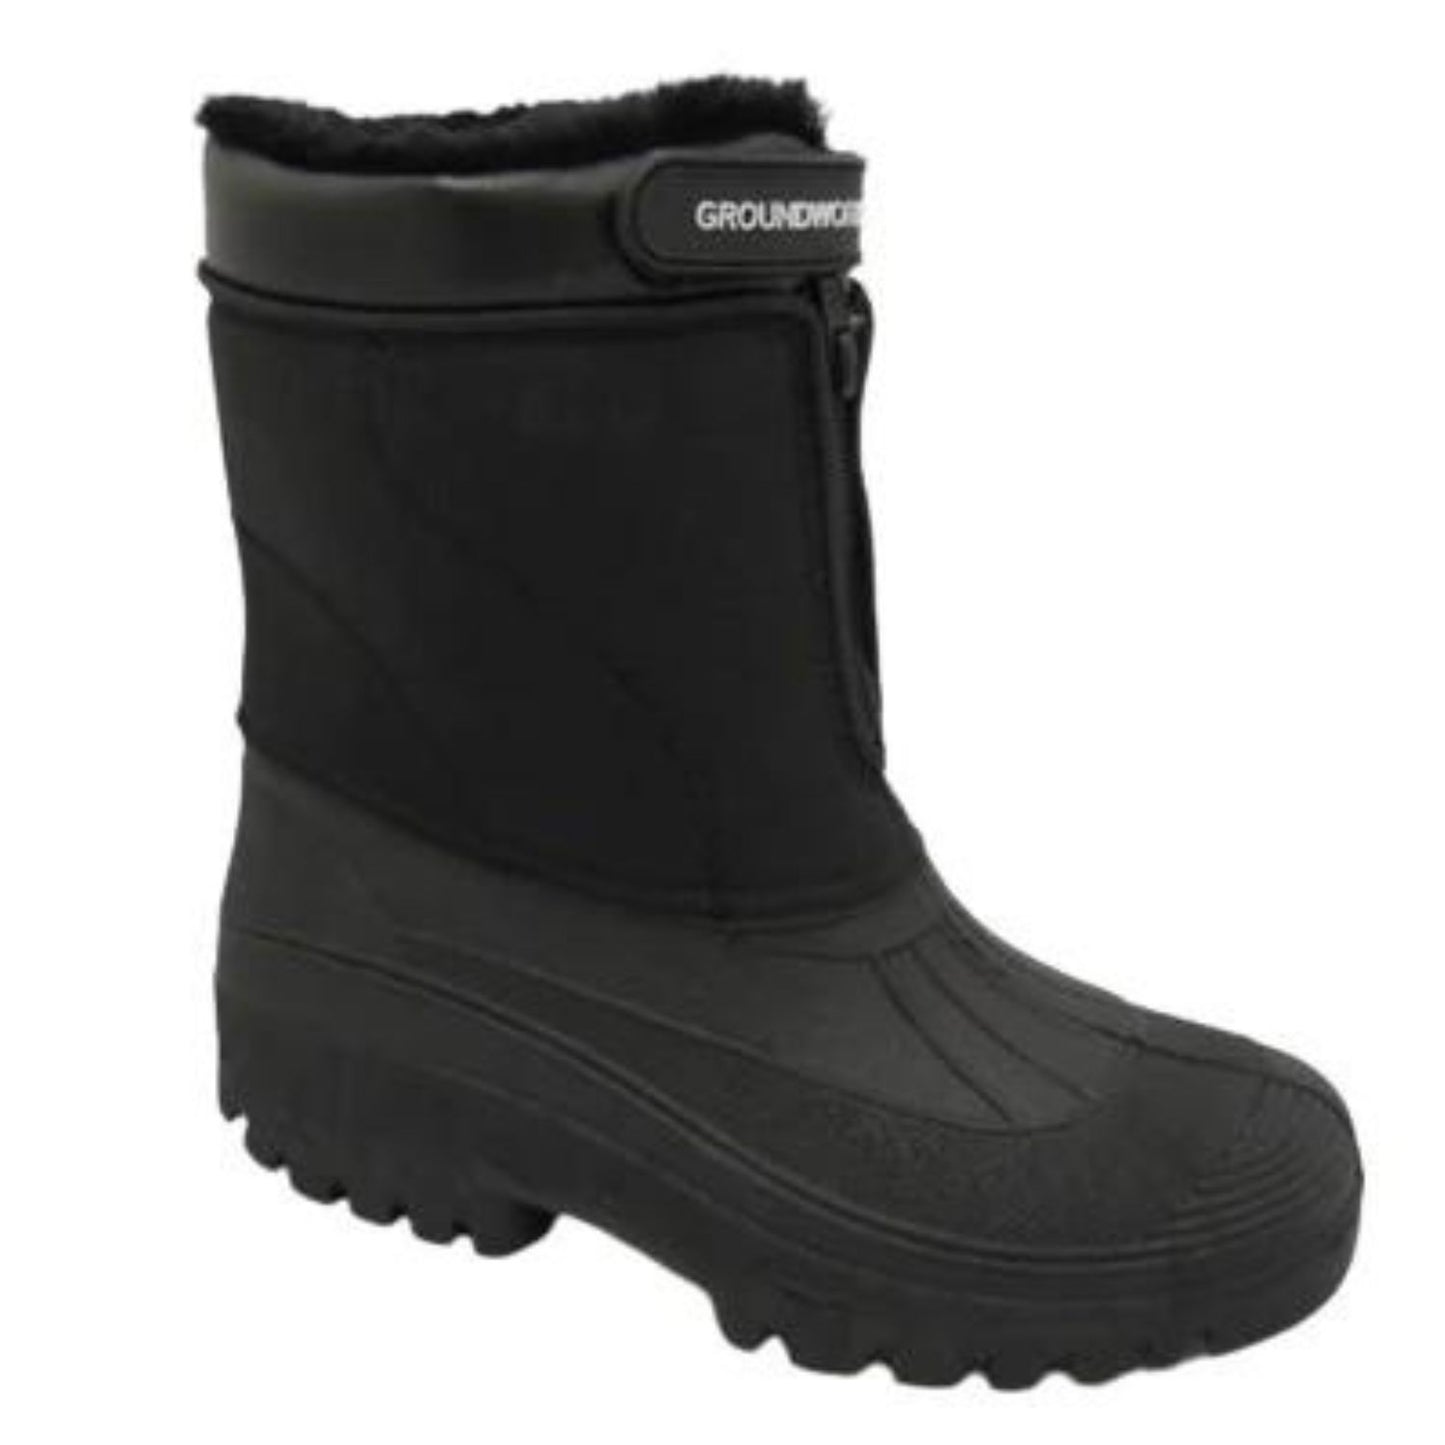 A black boot with deep tread rubber lowers and synthetic black uppers with faux fur lining and zip and velcro closure on the front